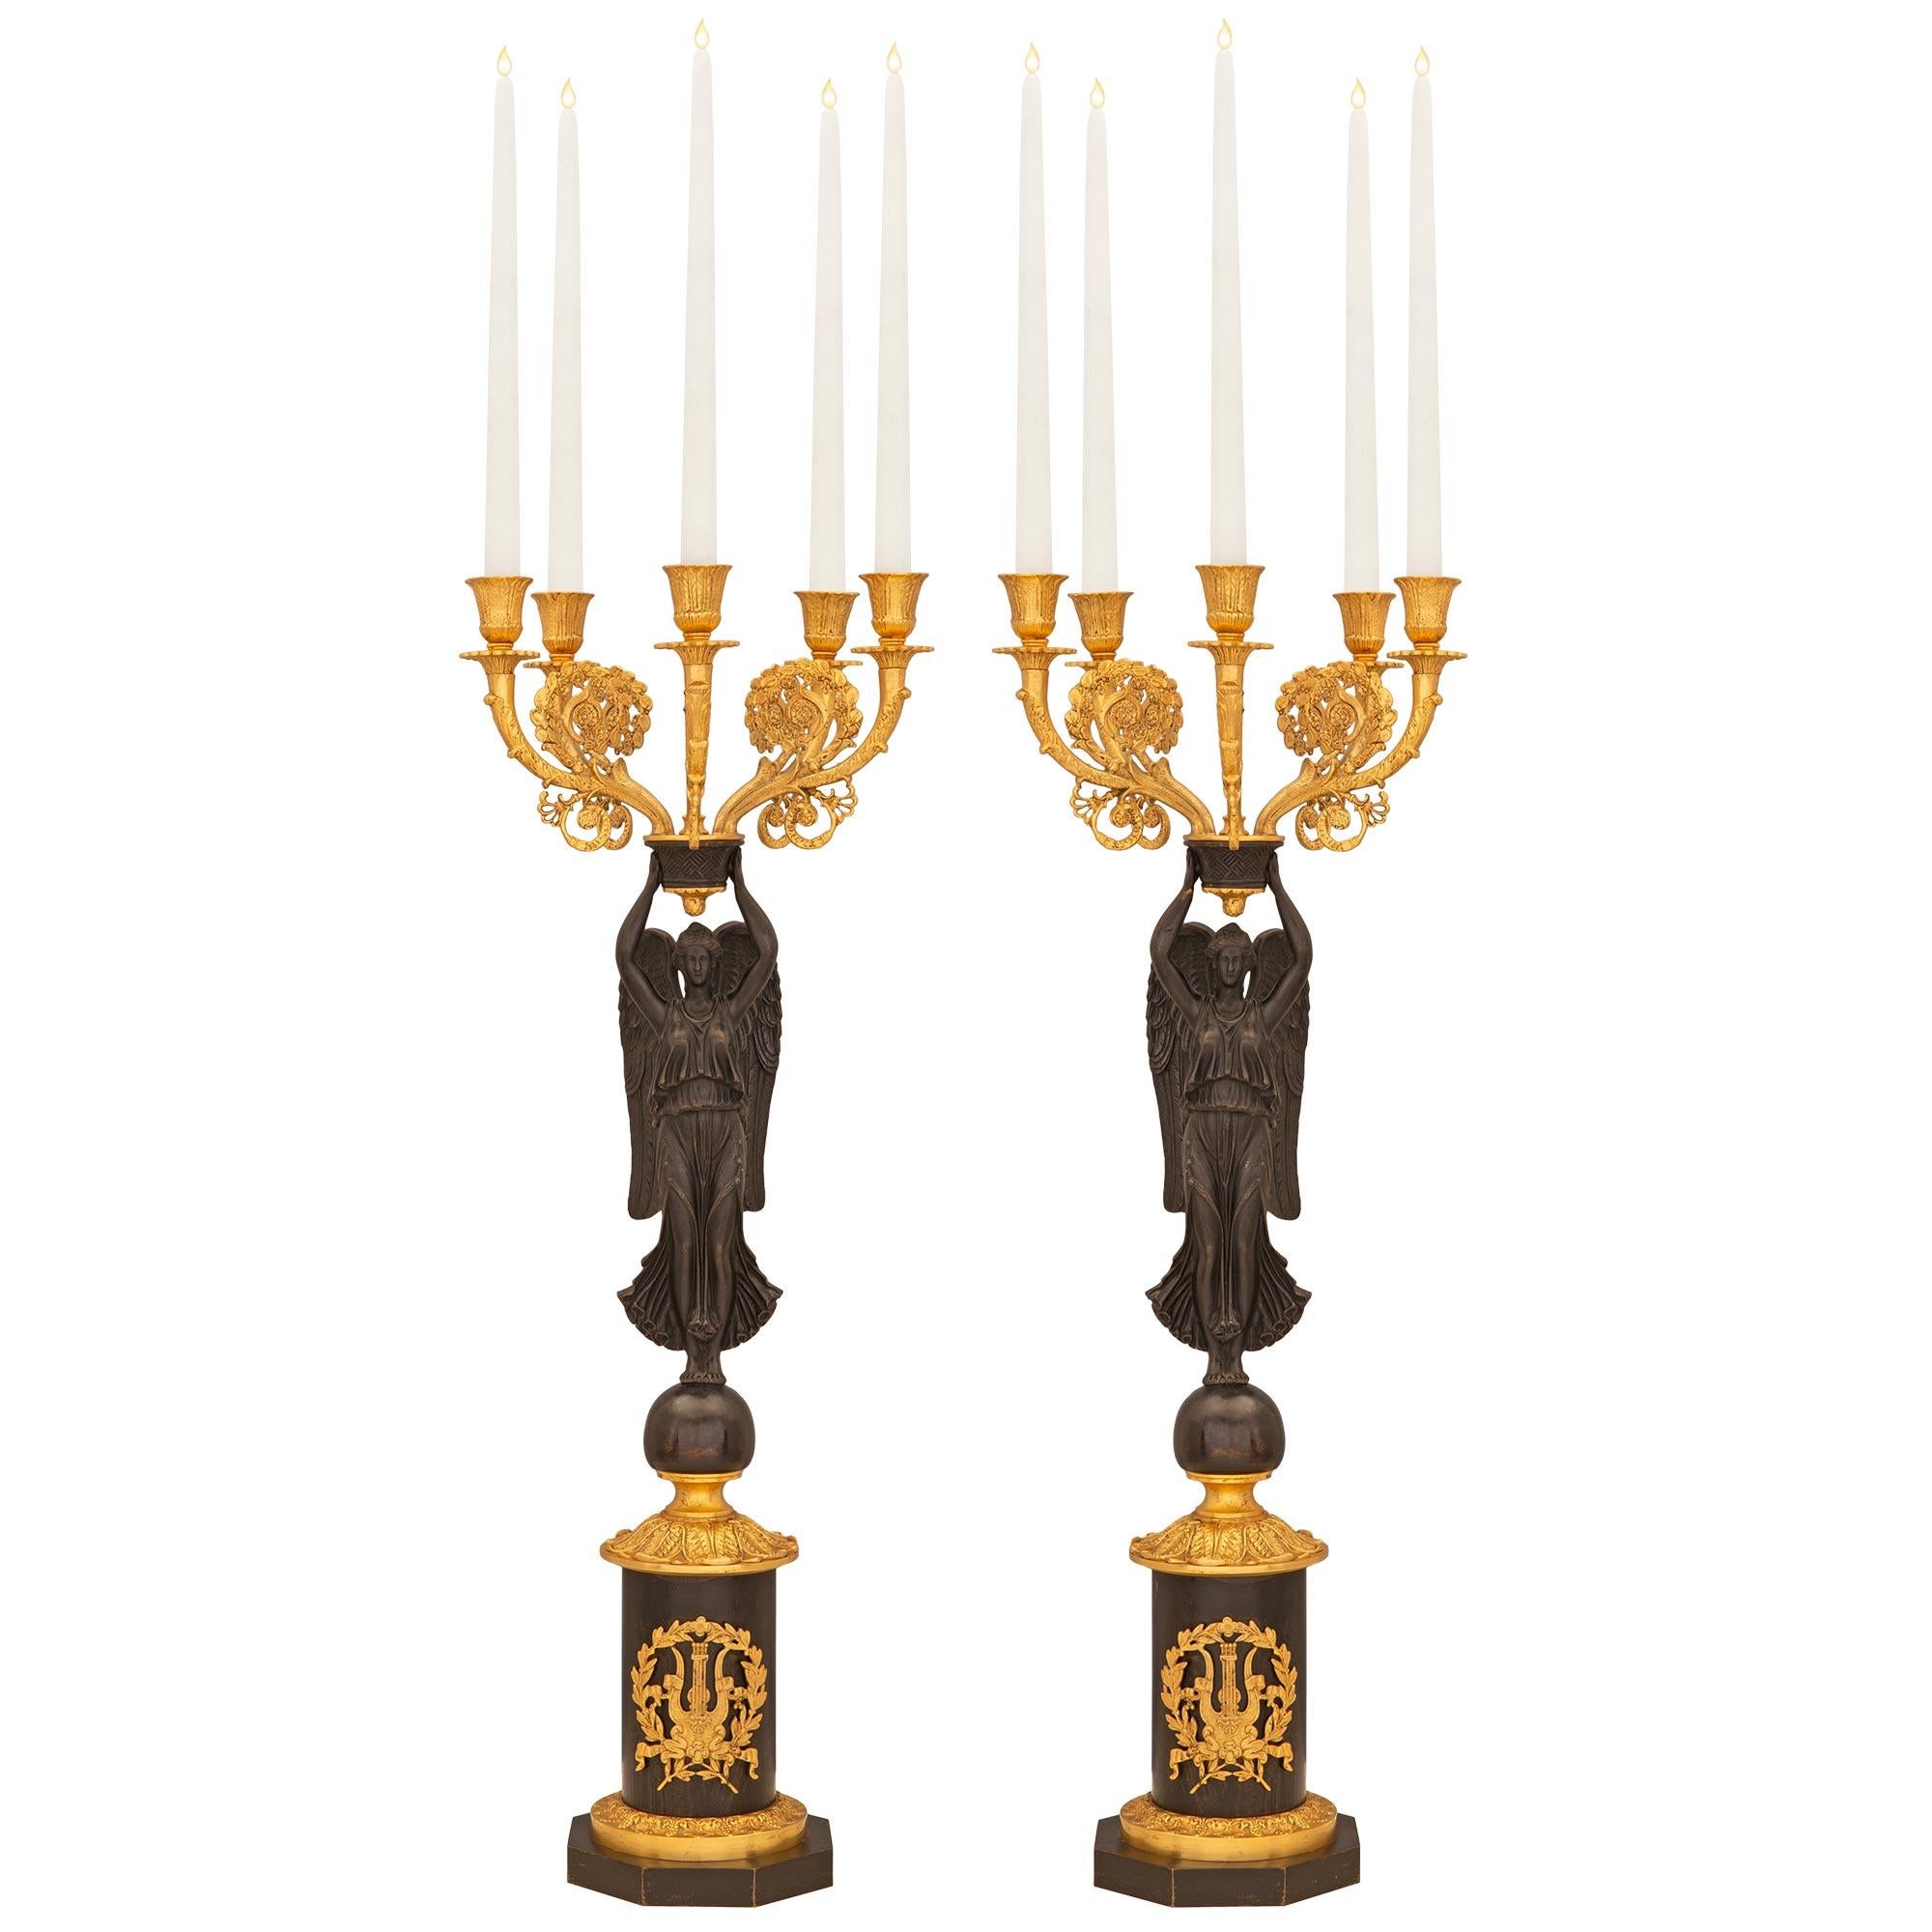 Pair of French 19th Century Neoclassical Style Five-Arm Candelabras For Sale 6